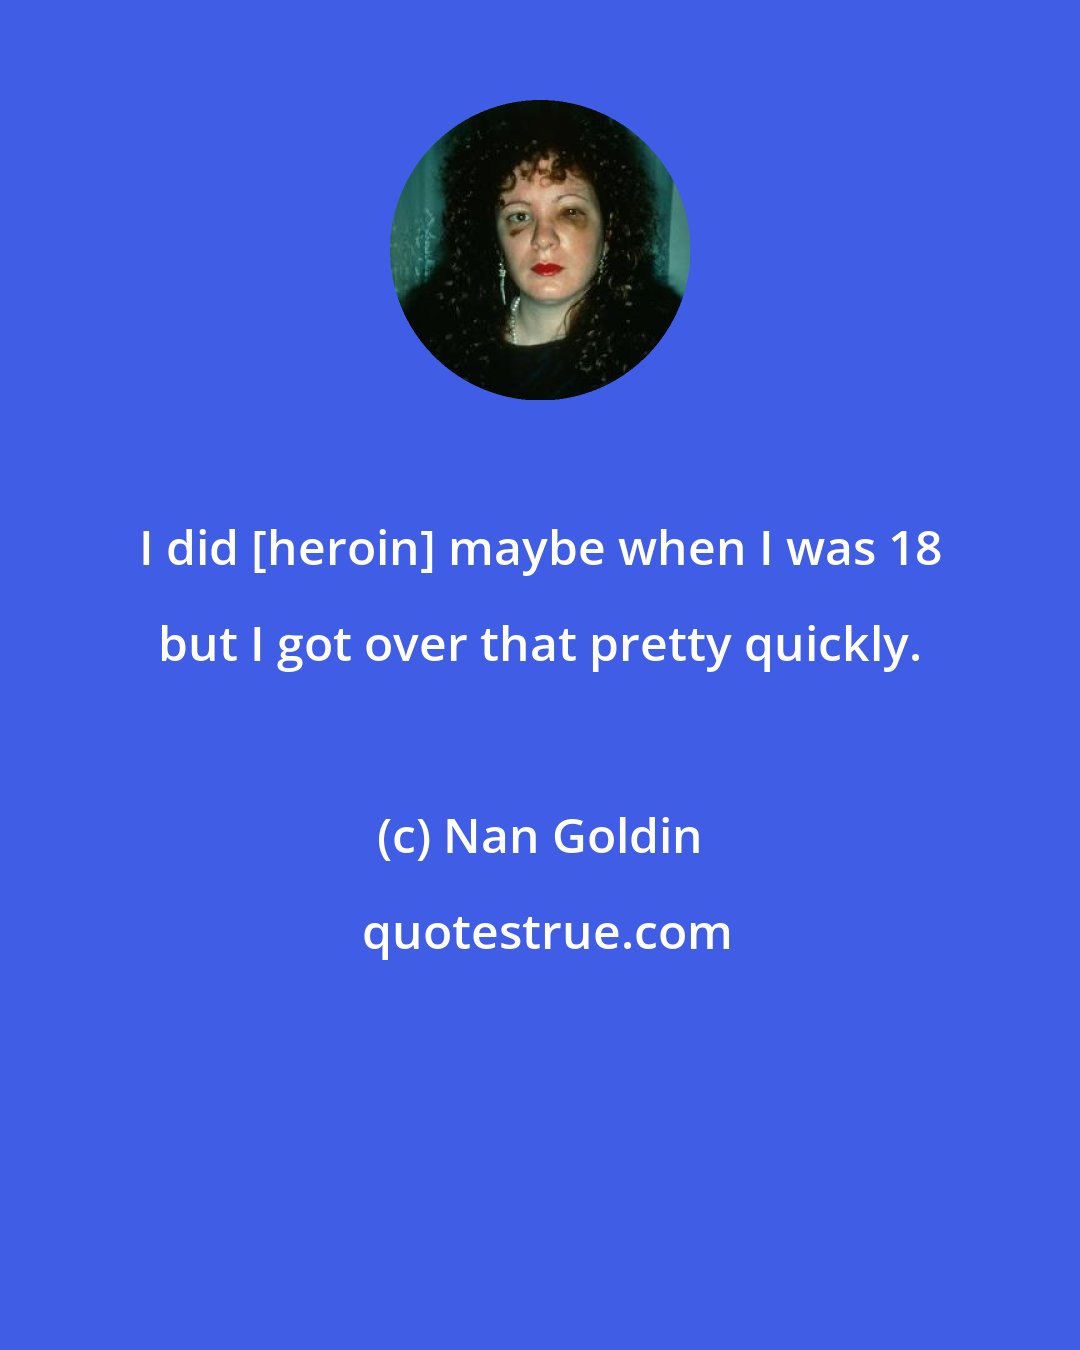 Nan Goldin: I did [heroin] maybe when I was 18 but I got over that pretty quickly.